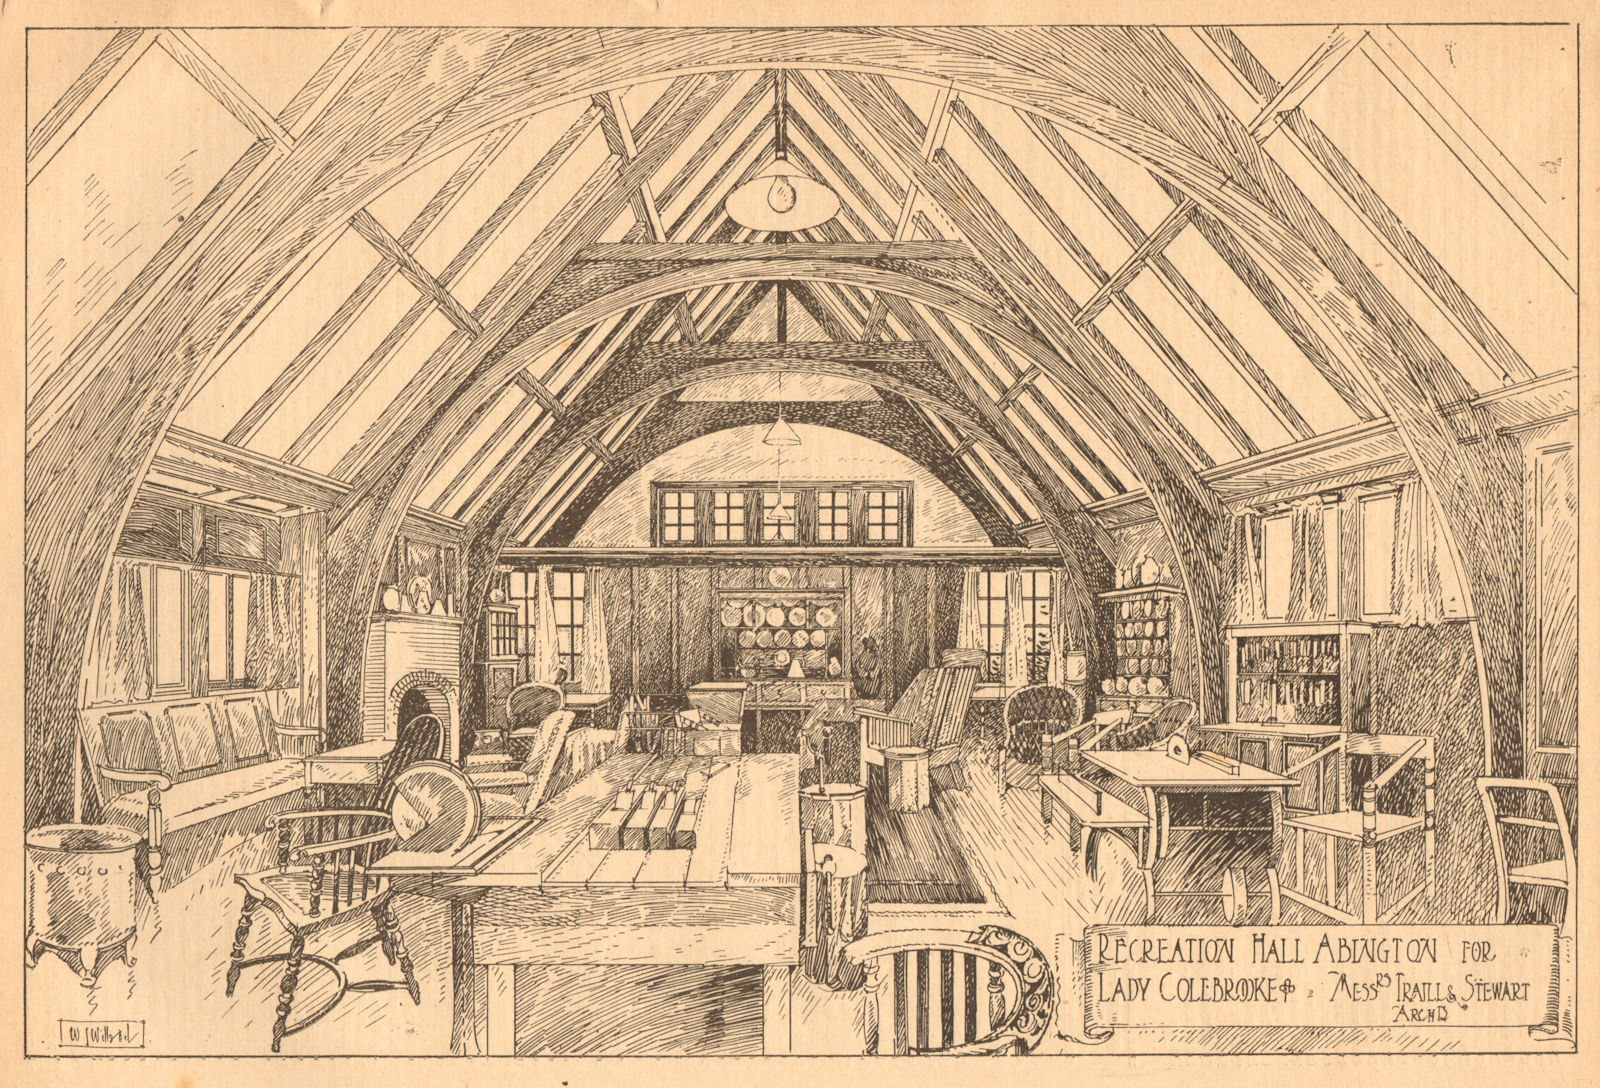 Associate Product Recreation hall, Abington for Lady Colebrooke. Traill & Stewart. Northants 1902